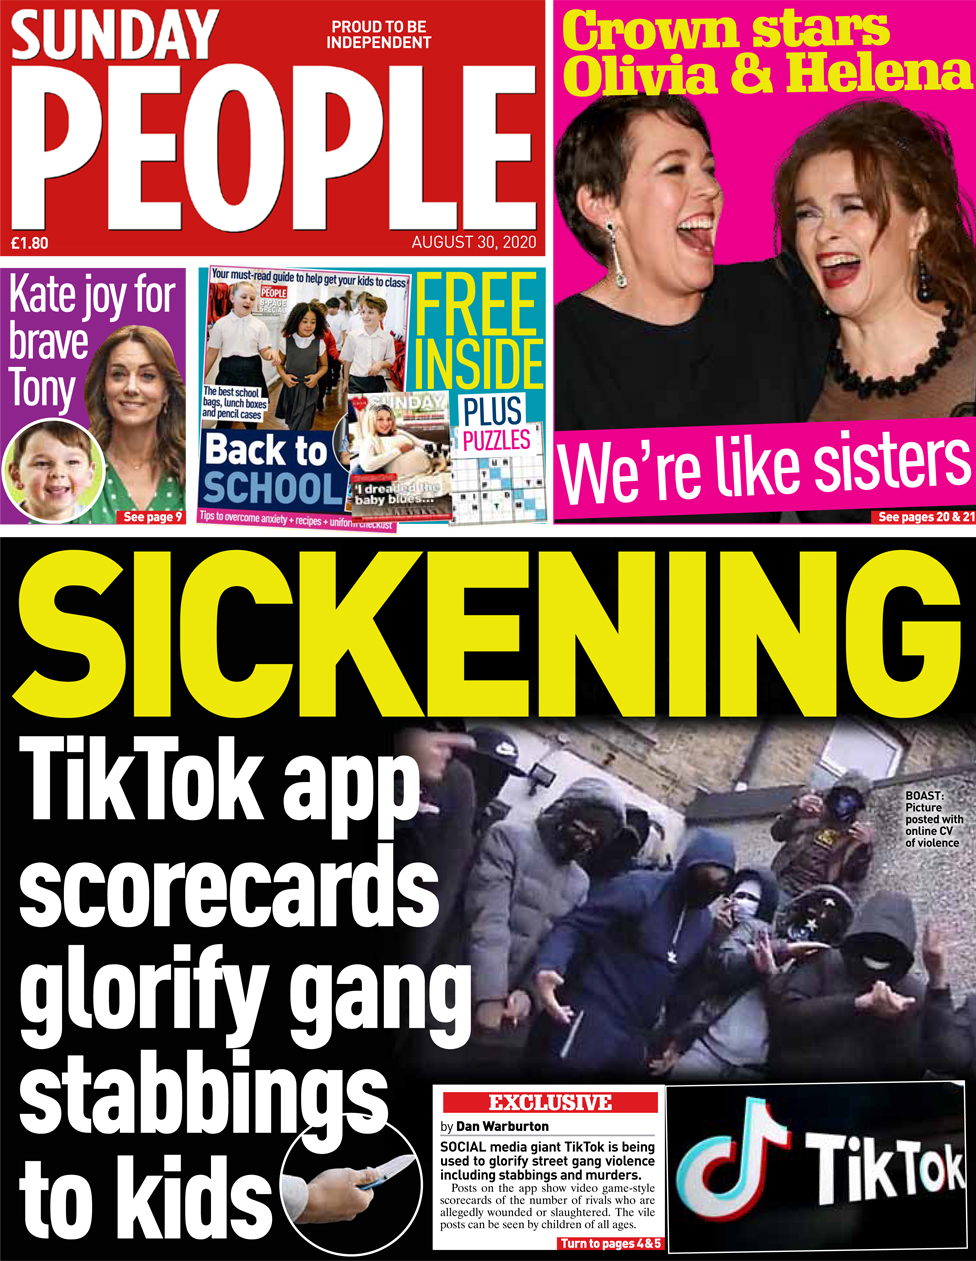 The Sunday People front page 30 August 2020